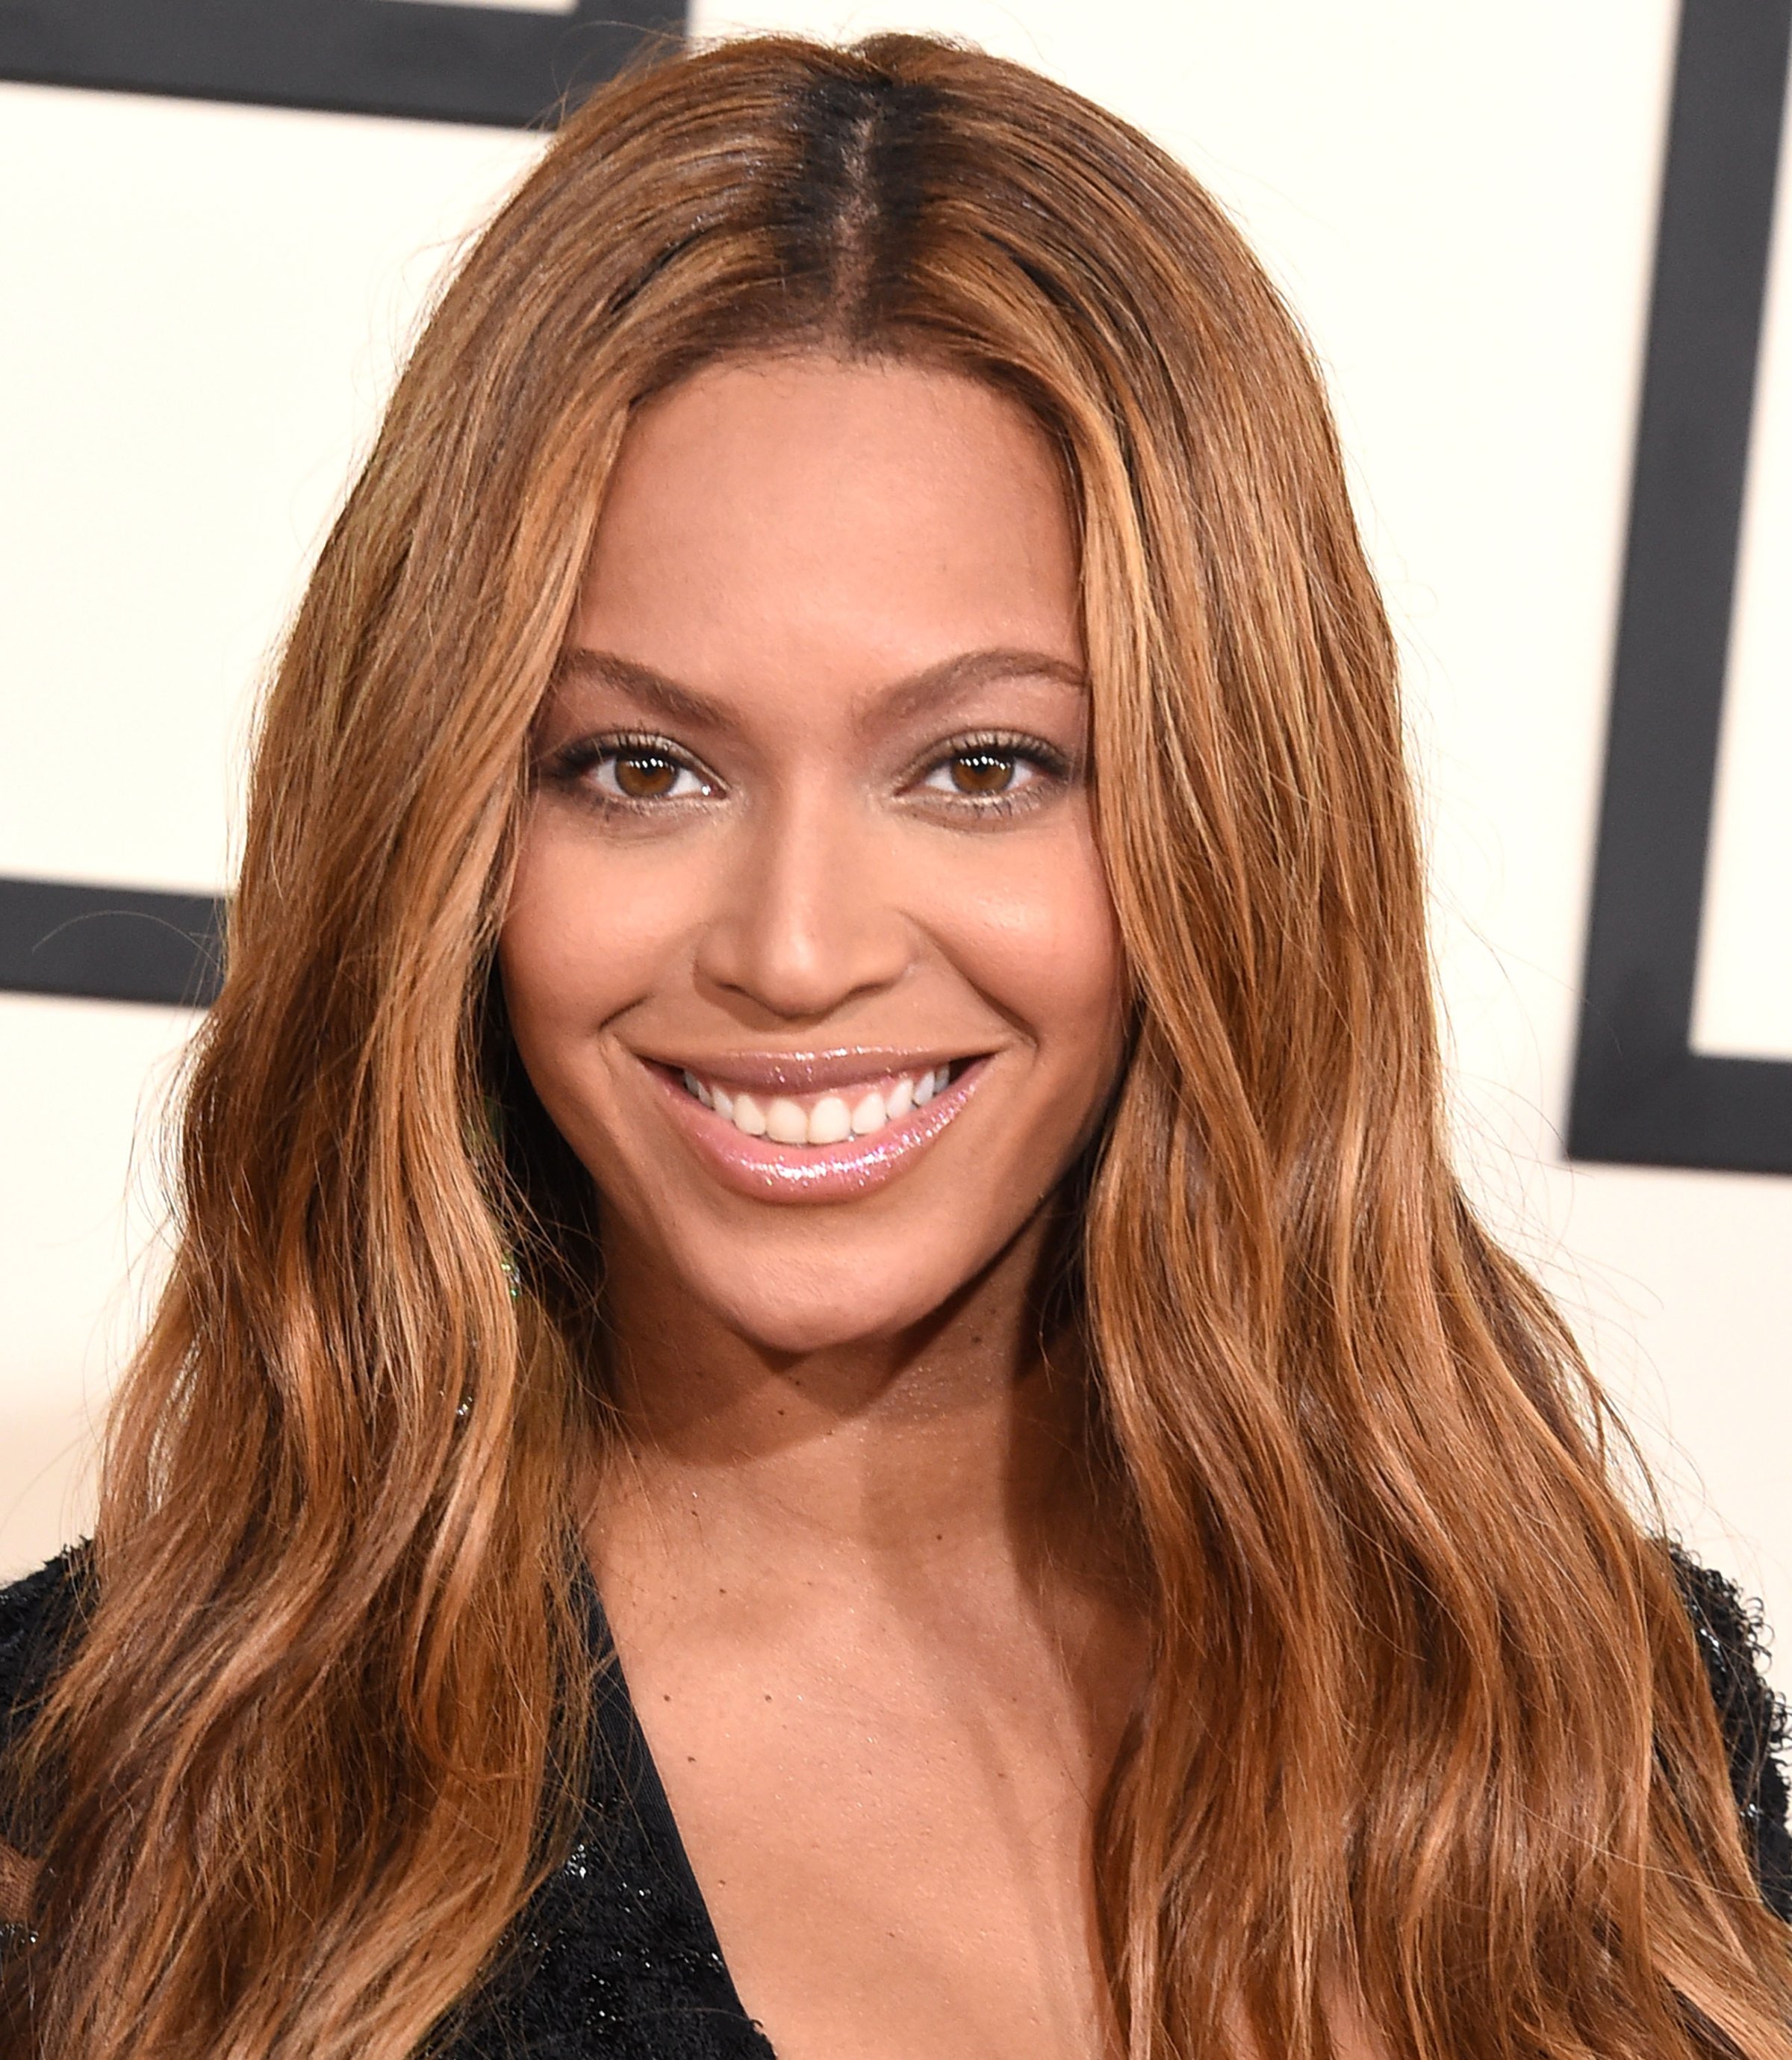 Beyonce arrives at the The 57th Annual GRAMMY Awards on February 8, 2015 in Los Angeles, California.